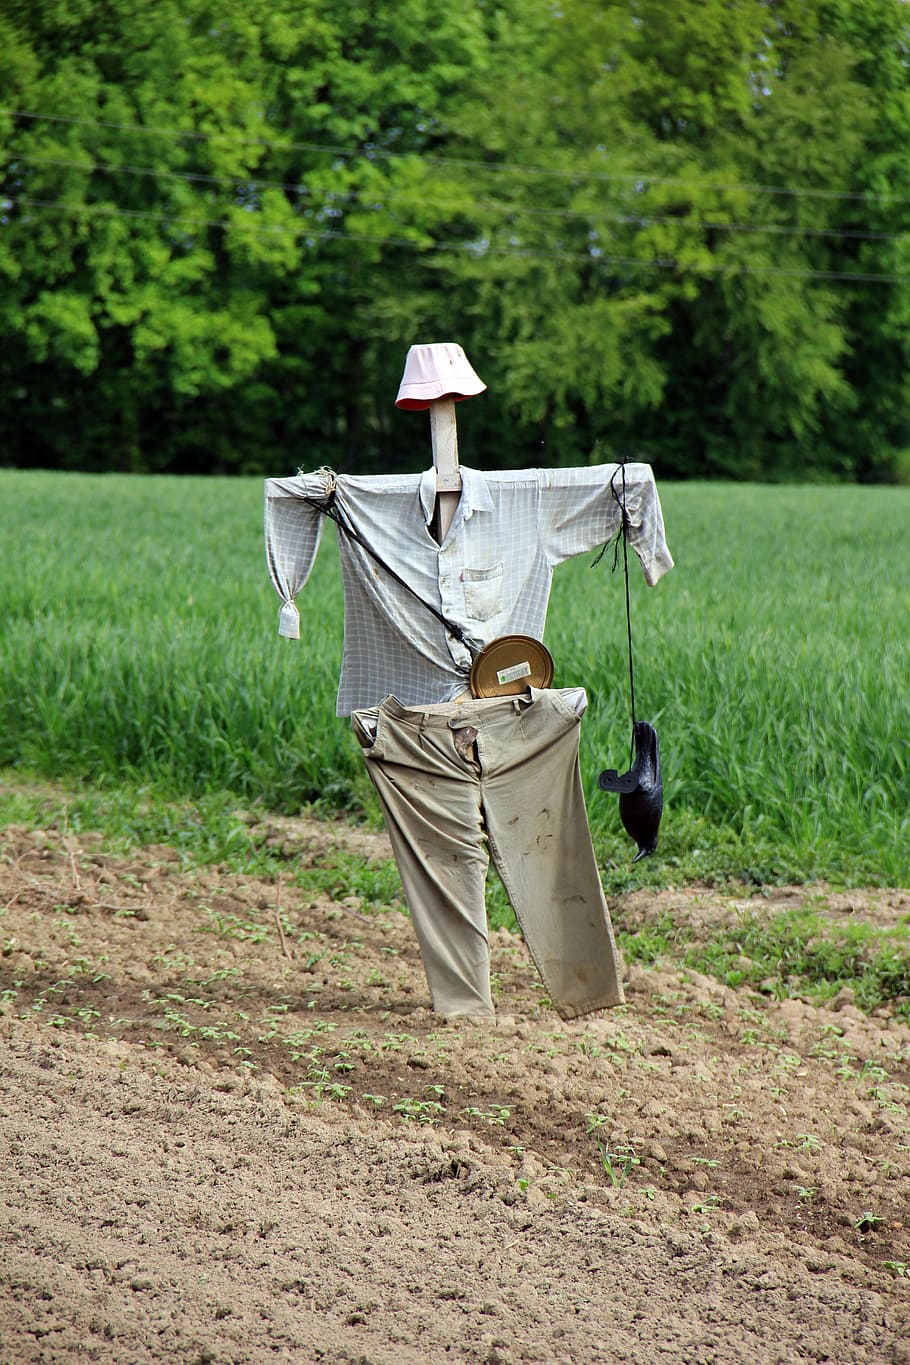 Scarecrow, Agriculture, Country Life, field, outdoors, nature, tree, day, growth, grass